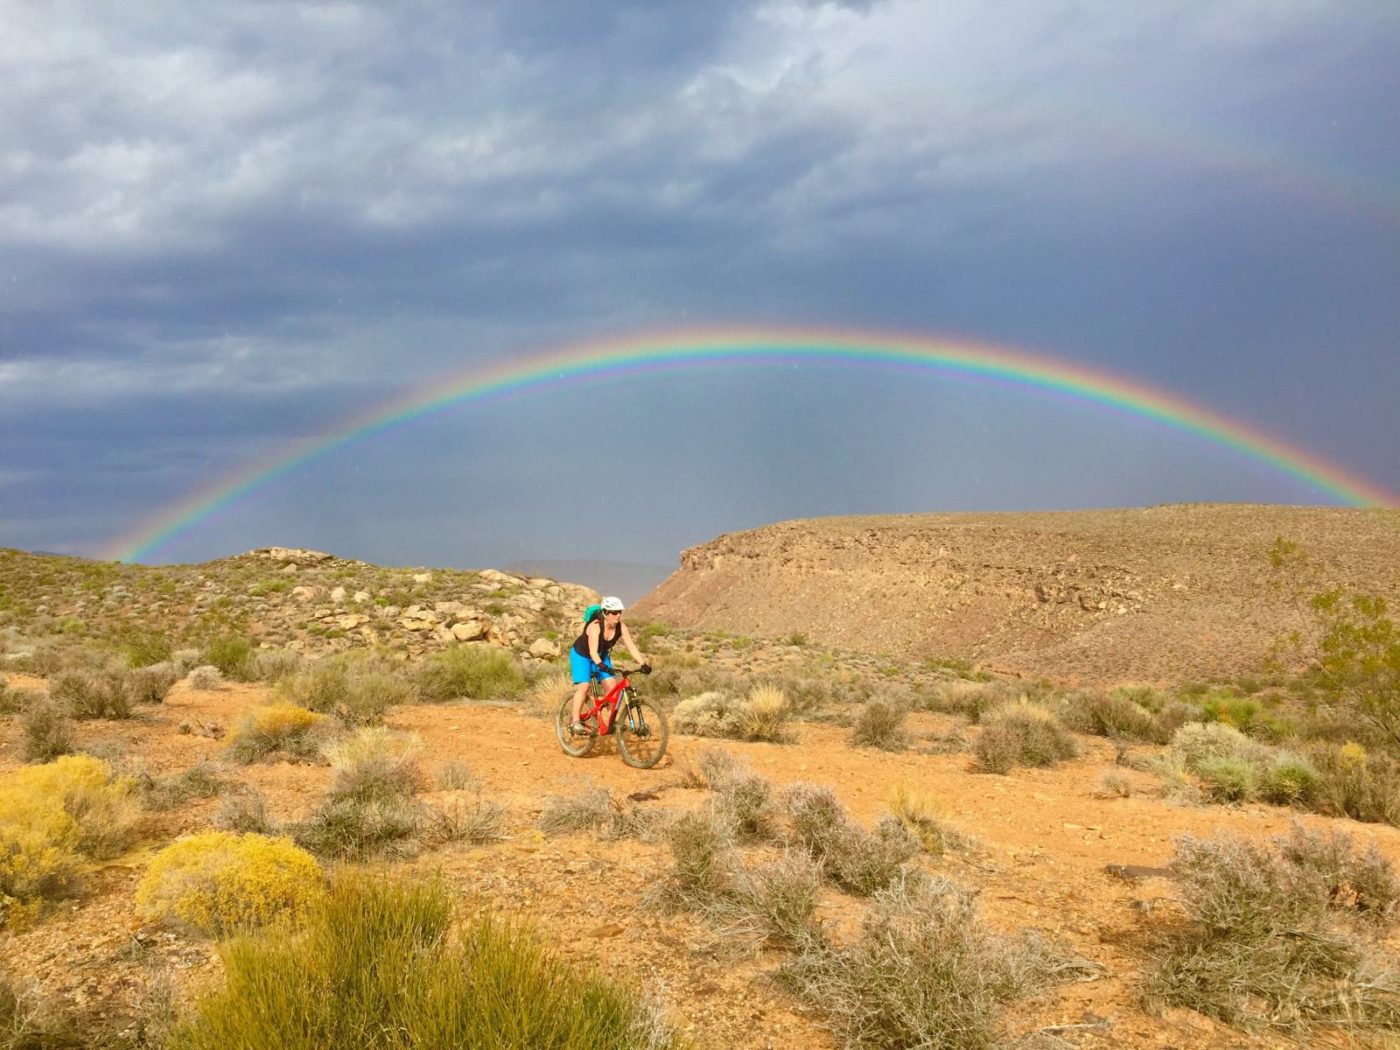 Woman riding a mountain bike across red rocky landscape with gray sky and clouds overhead and a rainbow arched over her in the background